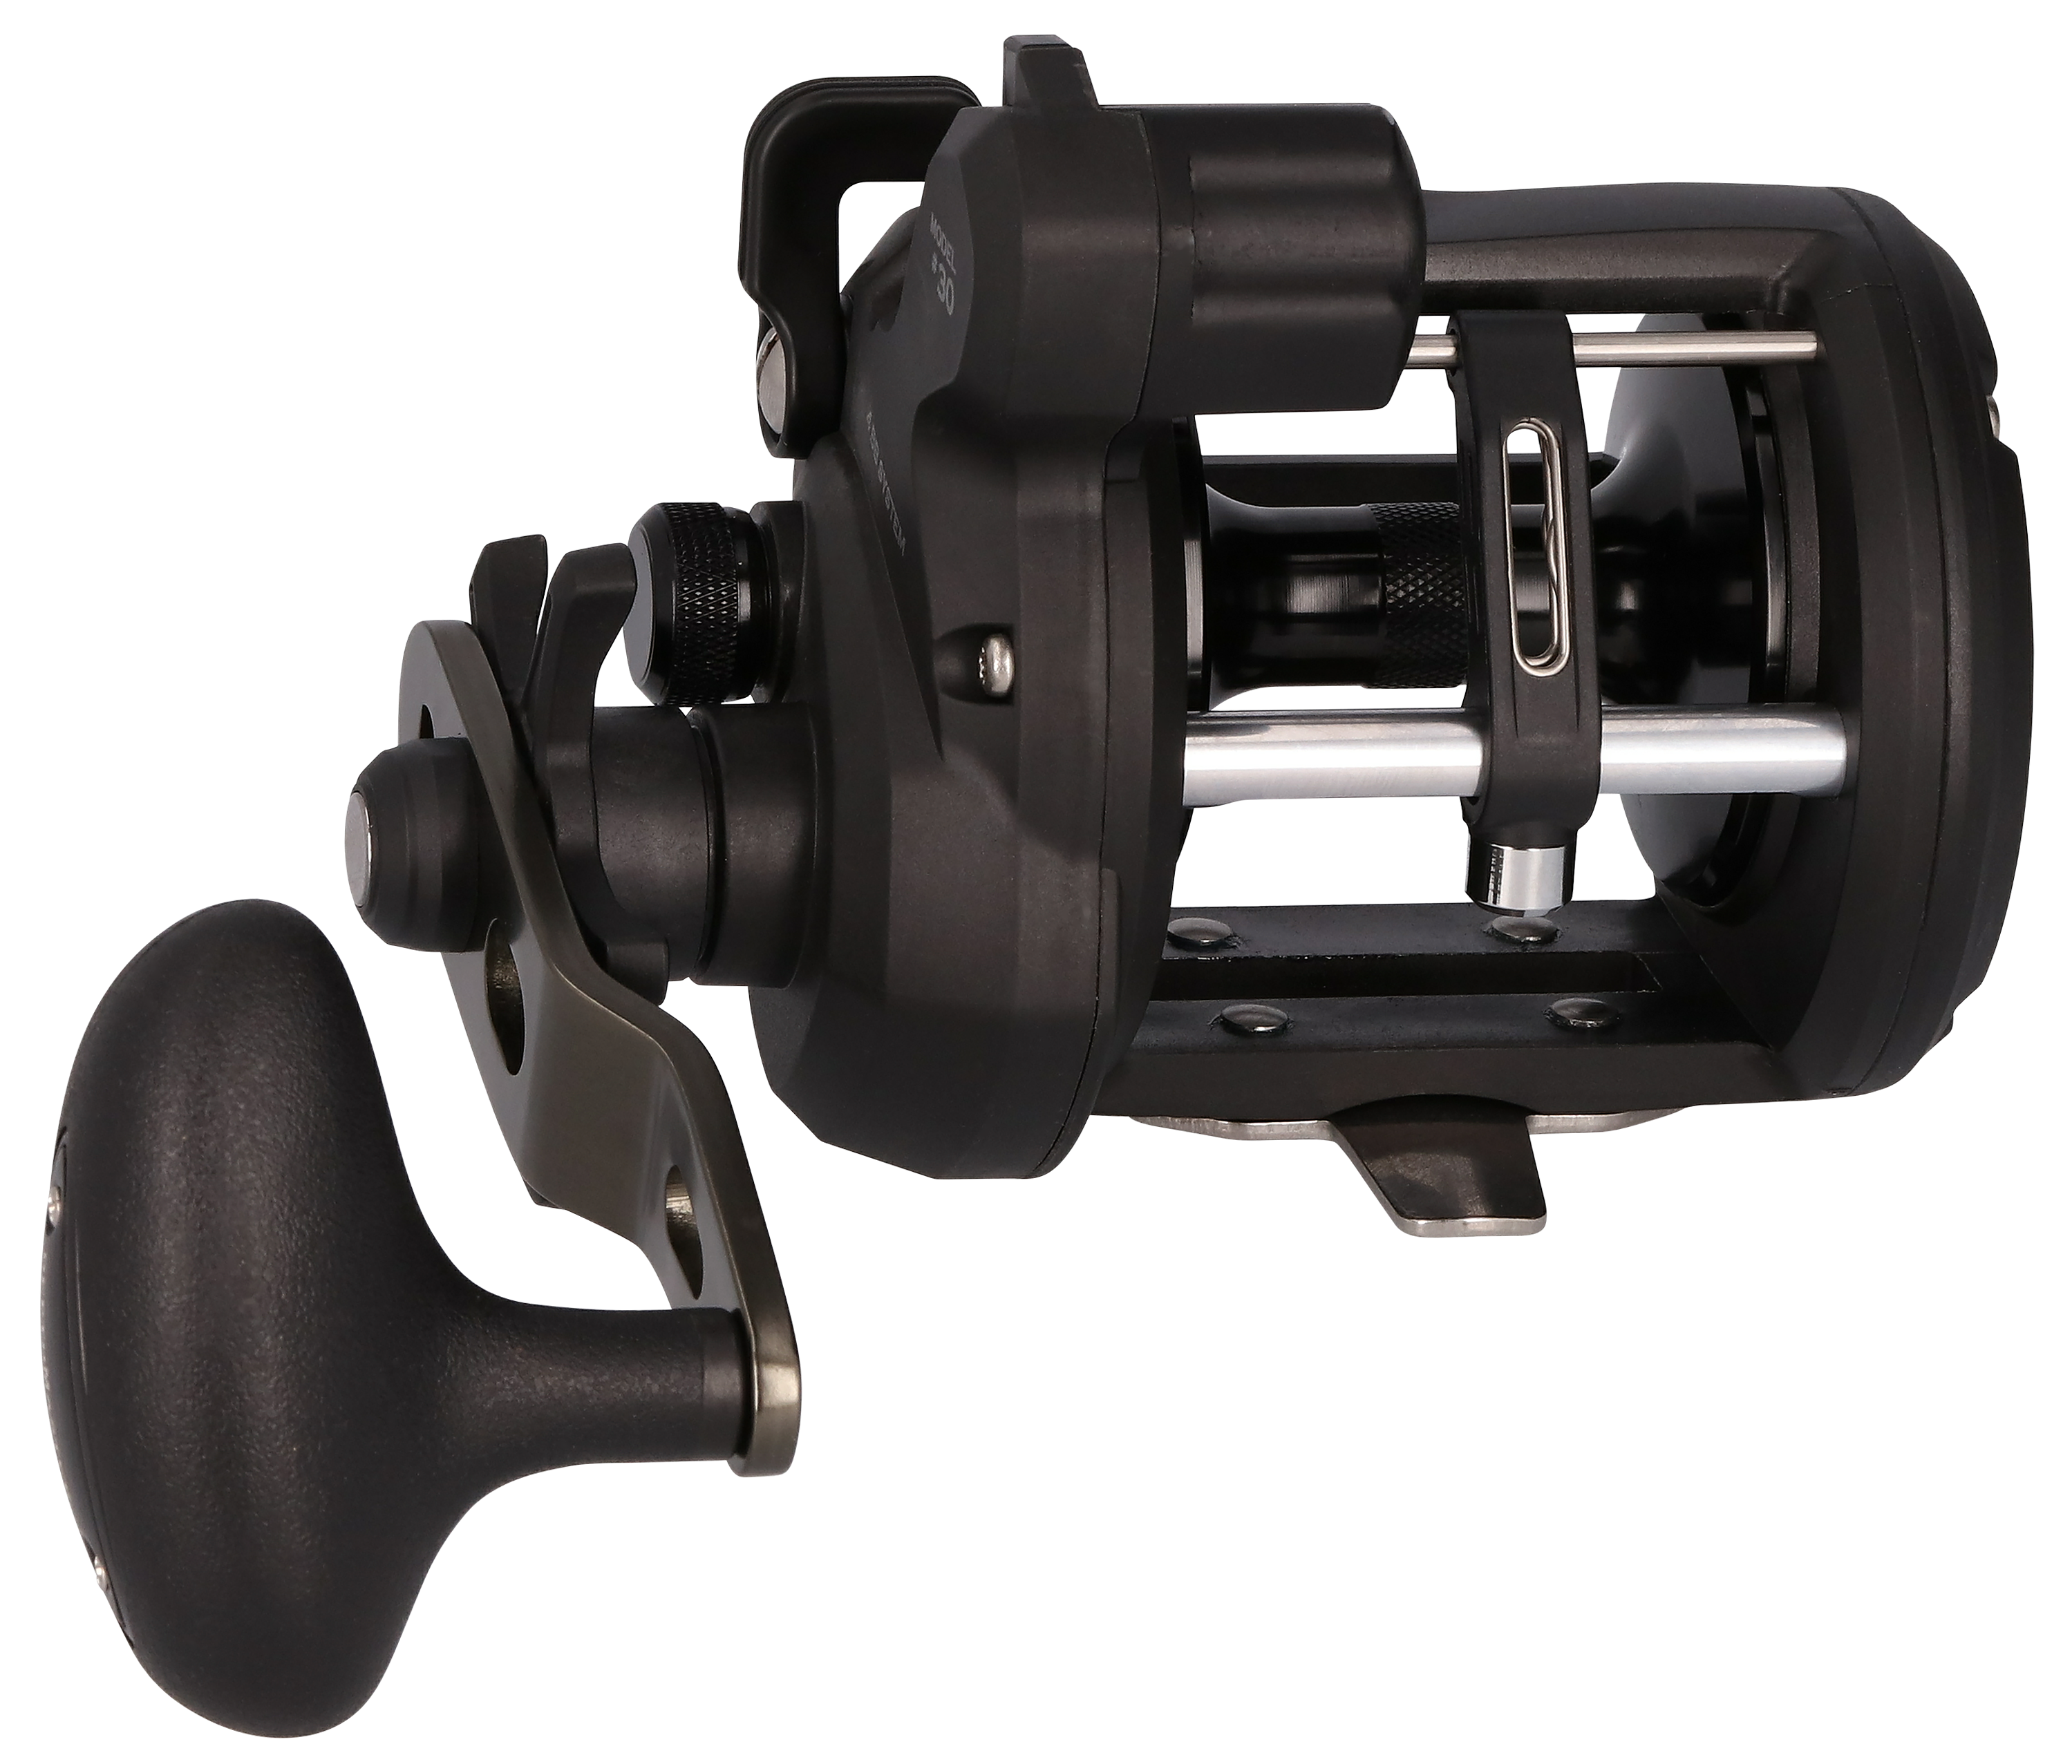 Bass Pro Shops Depthmaster Line Counter Reel - Right - 4.5:1 - 45 Size